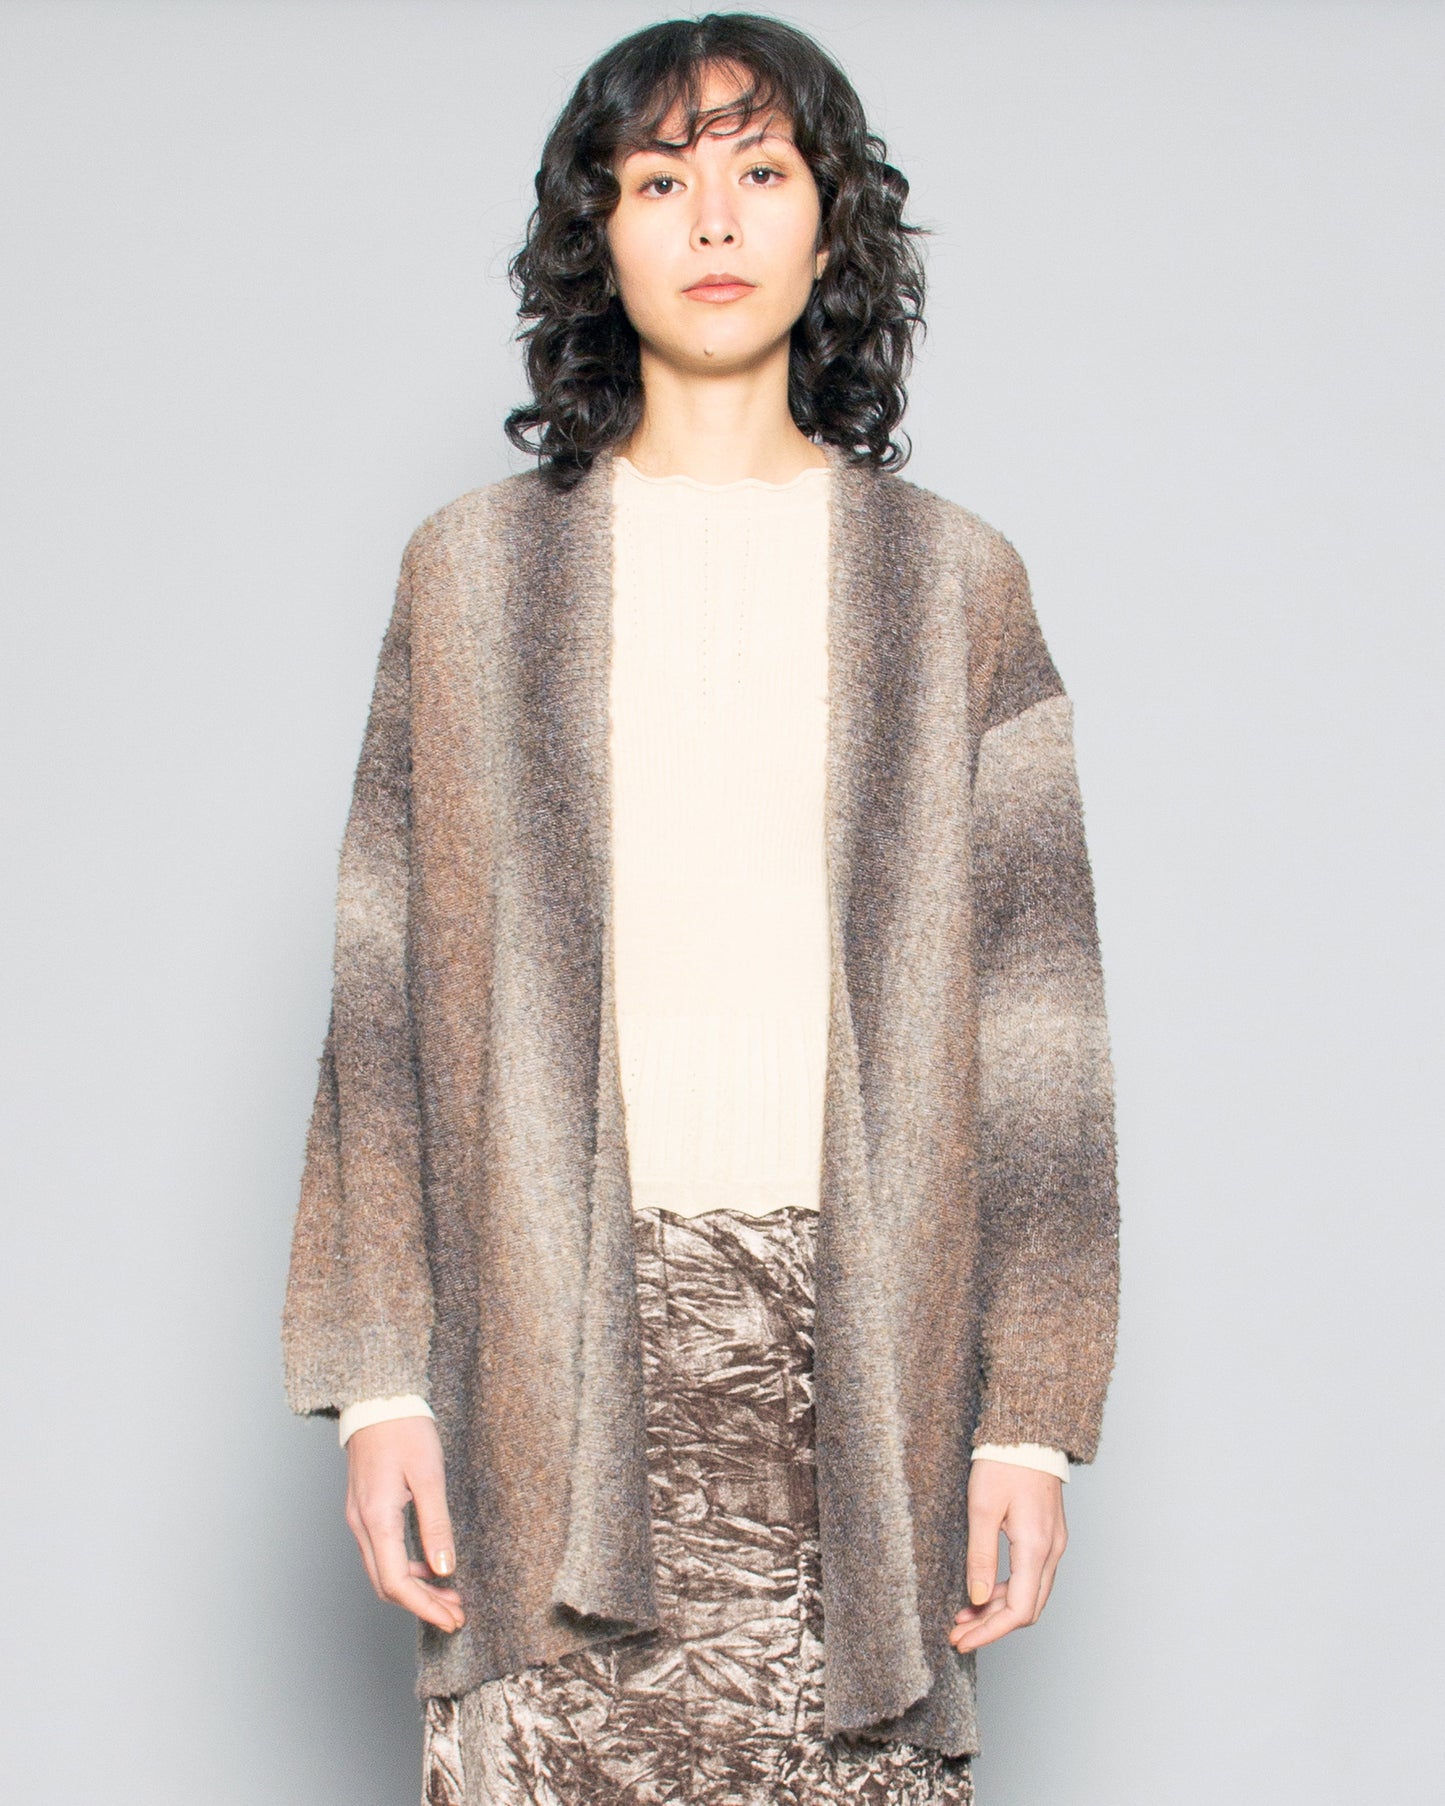 PERSONS Sloan Ombre Boucle Wool Blend Cardi in Brown Multi available at Lahn.shop